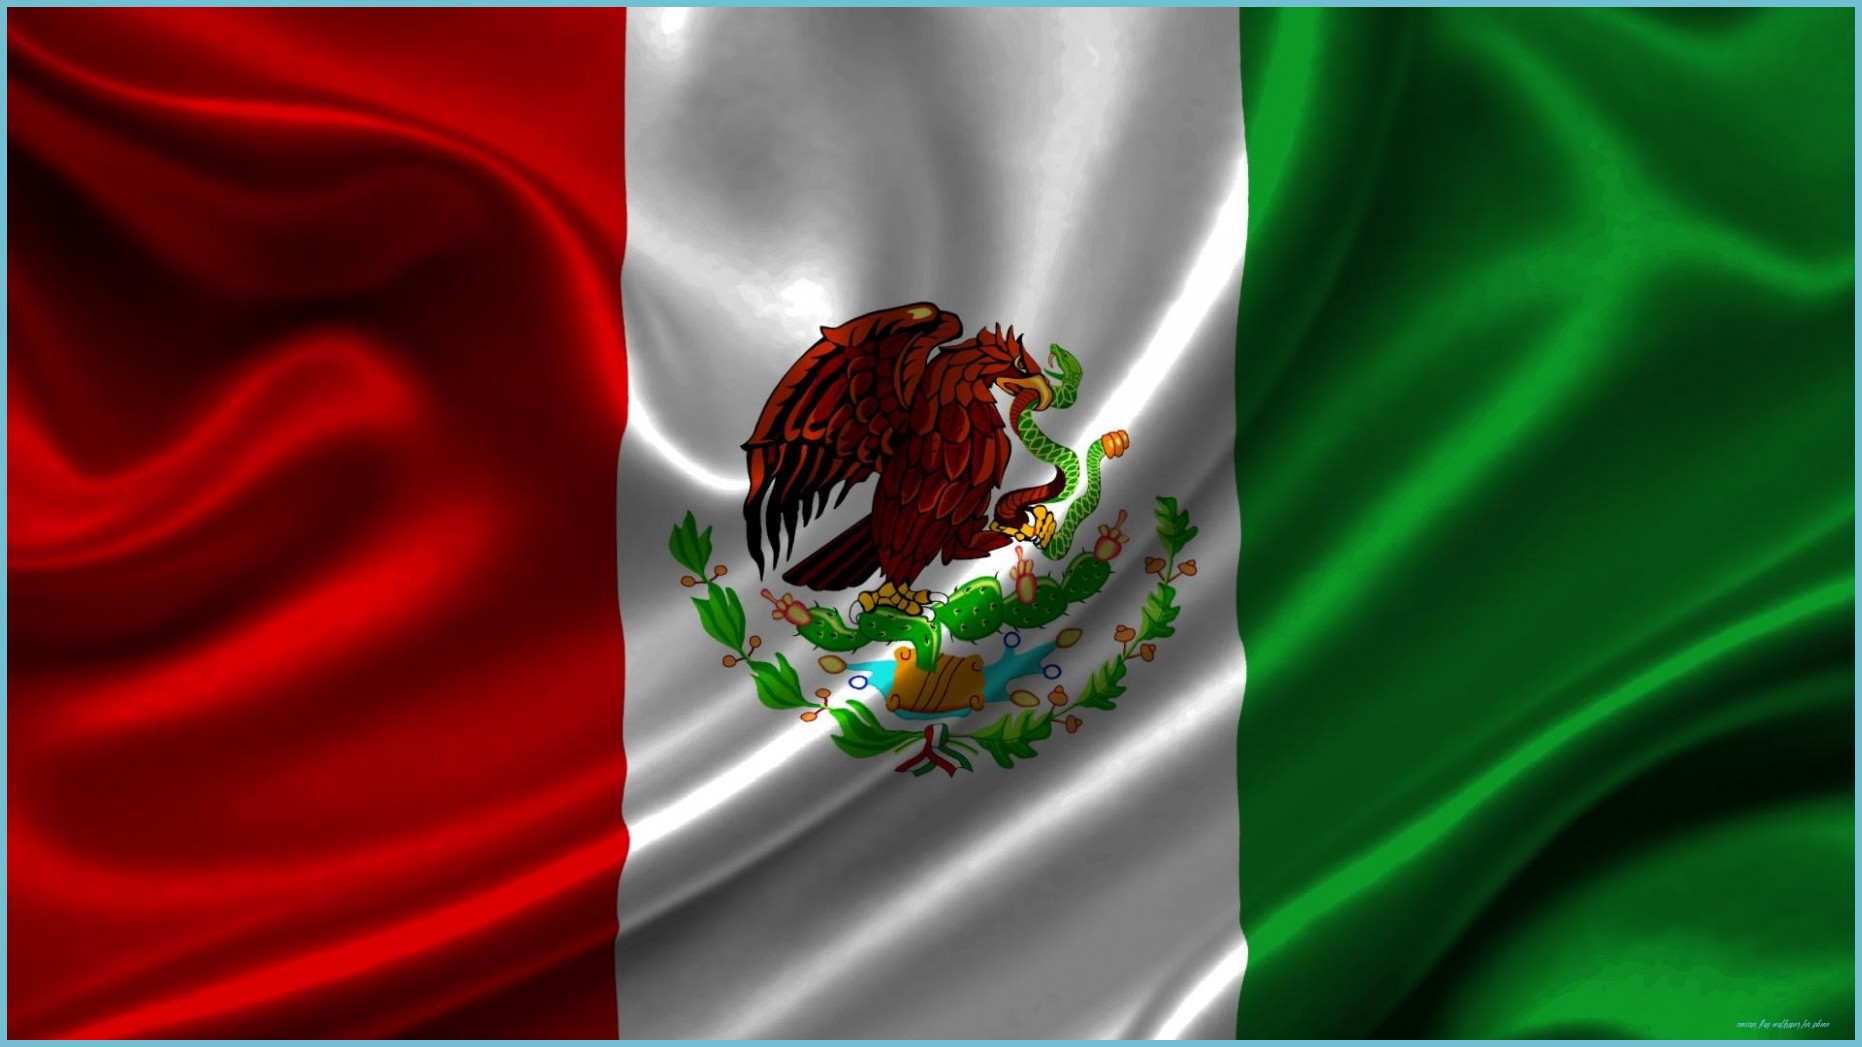 Mexico Flag wallpaper by Devilmaycry06  Download on ZEDGE  bac2